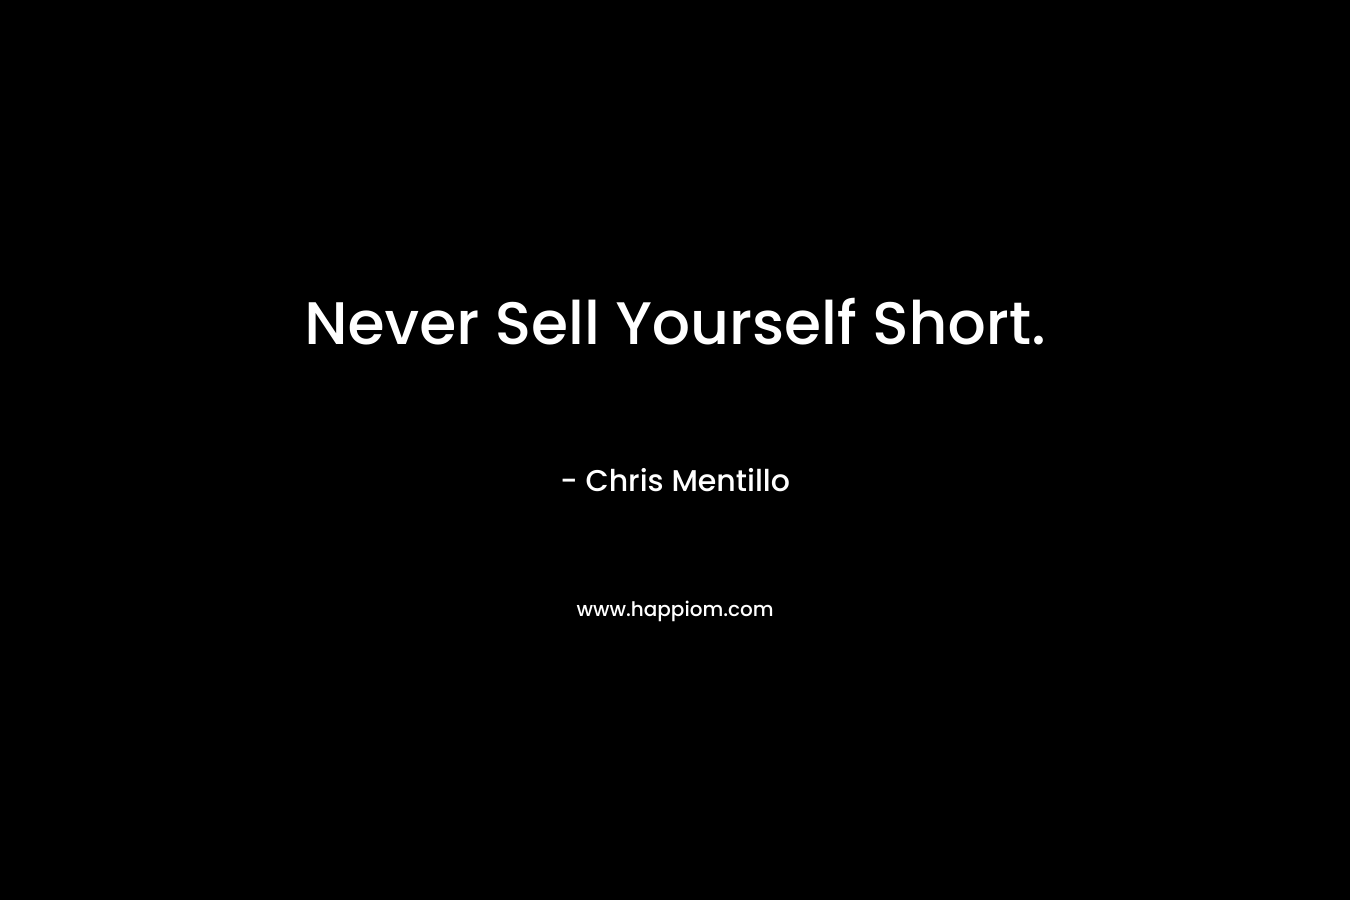 Never Sell Yourself Short.